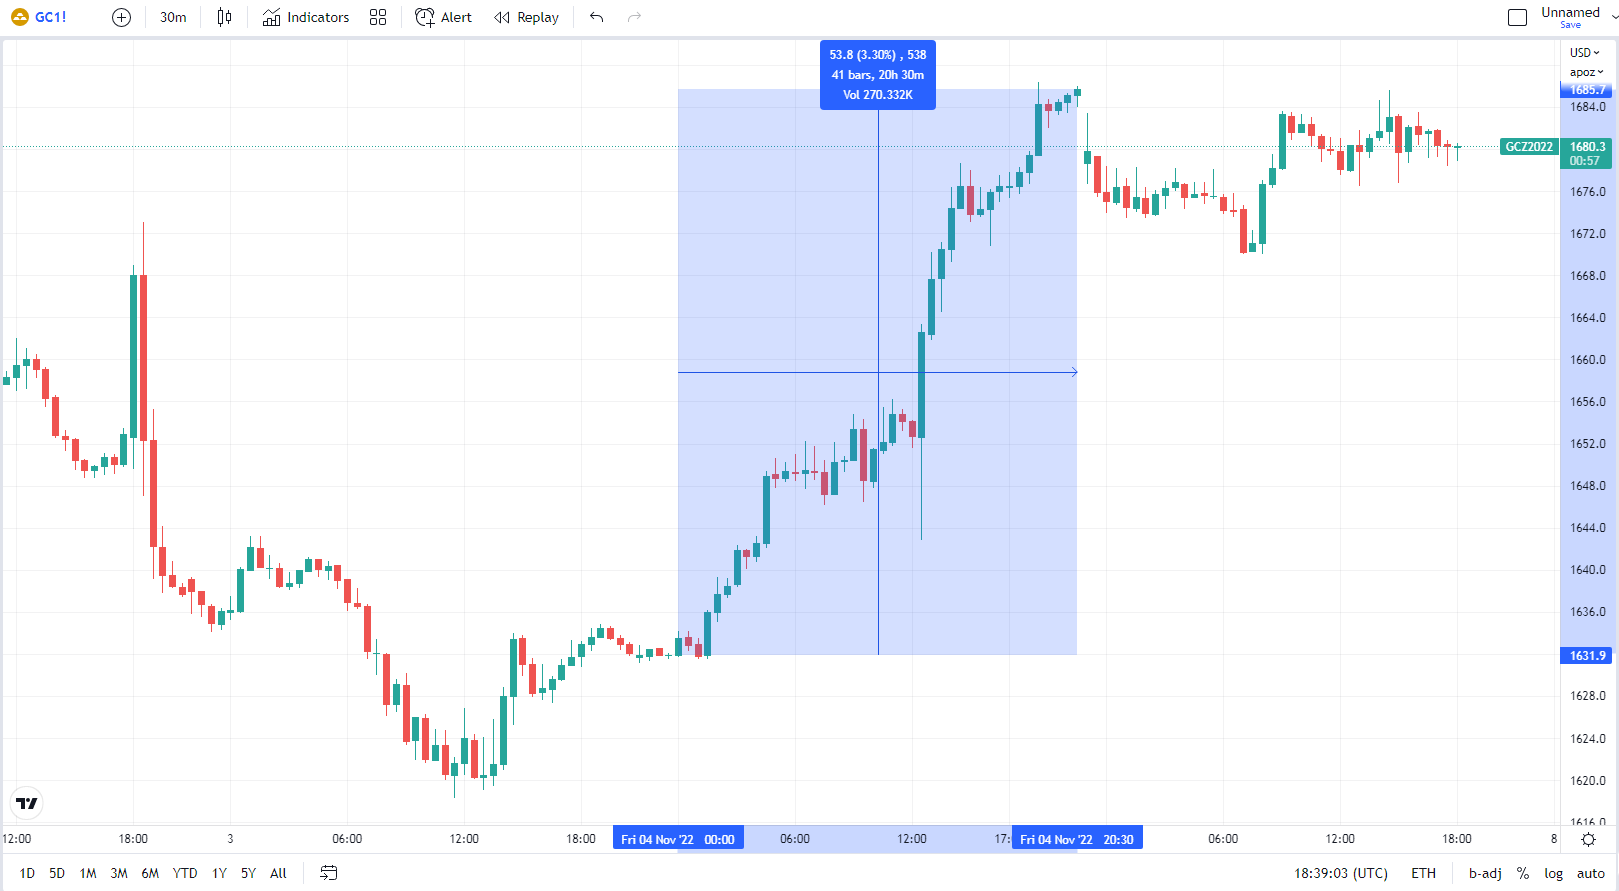 30 minutes chart of GC (Gold Futures), Gold's appreciation on Friday. Source: tradingview.com